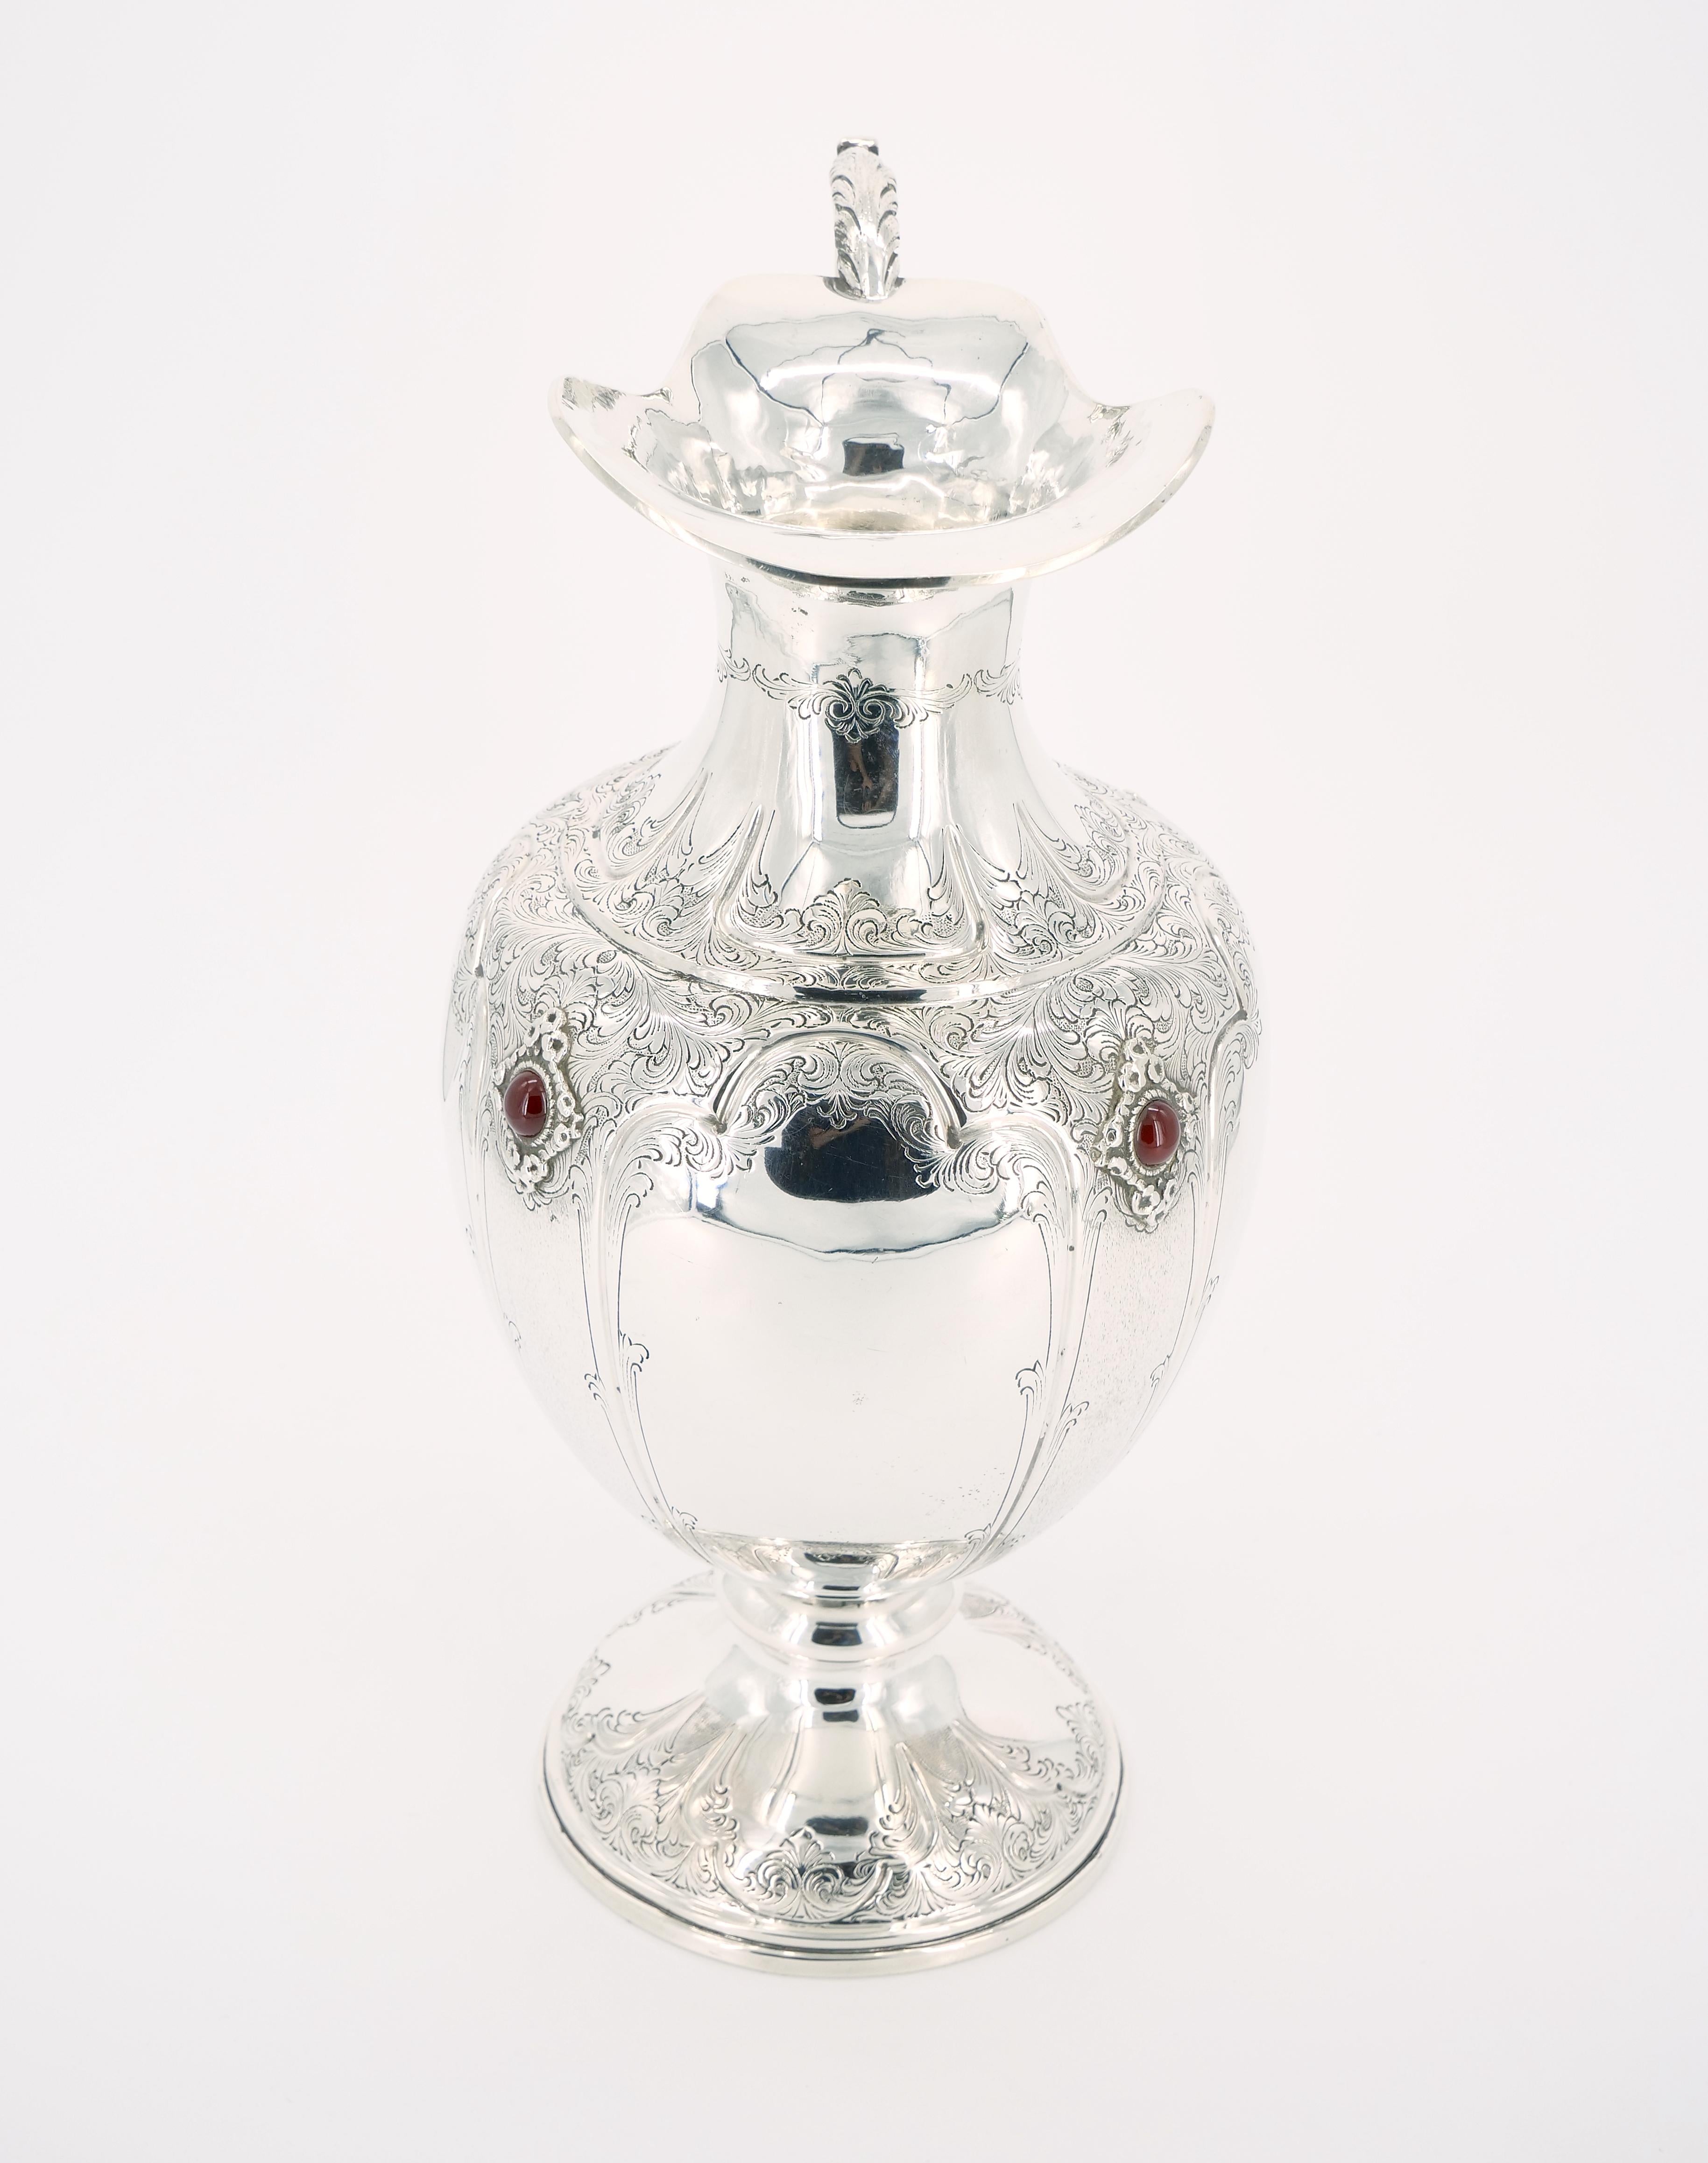 Mid-19th Century Italian Sterling Silver / Precious Stone One Handled Decorative Vase / Piece For Sale